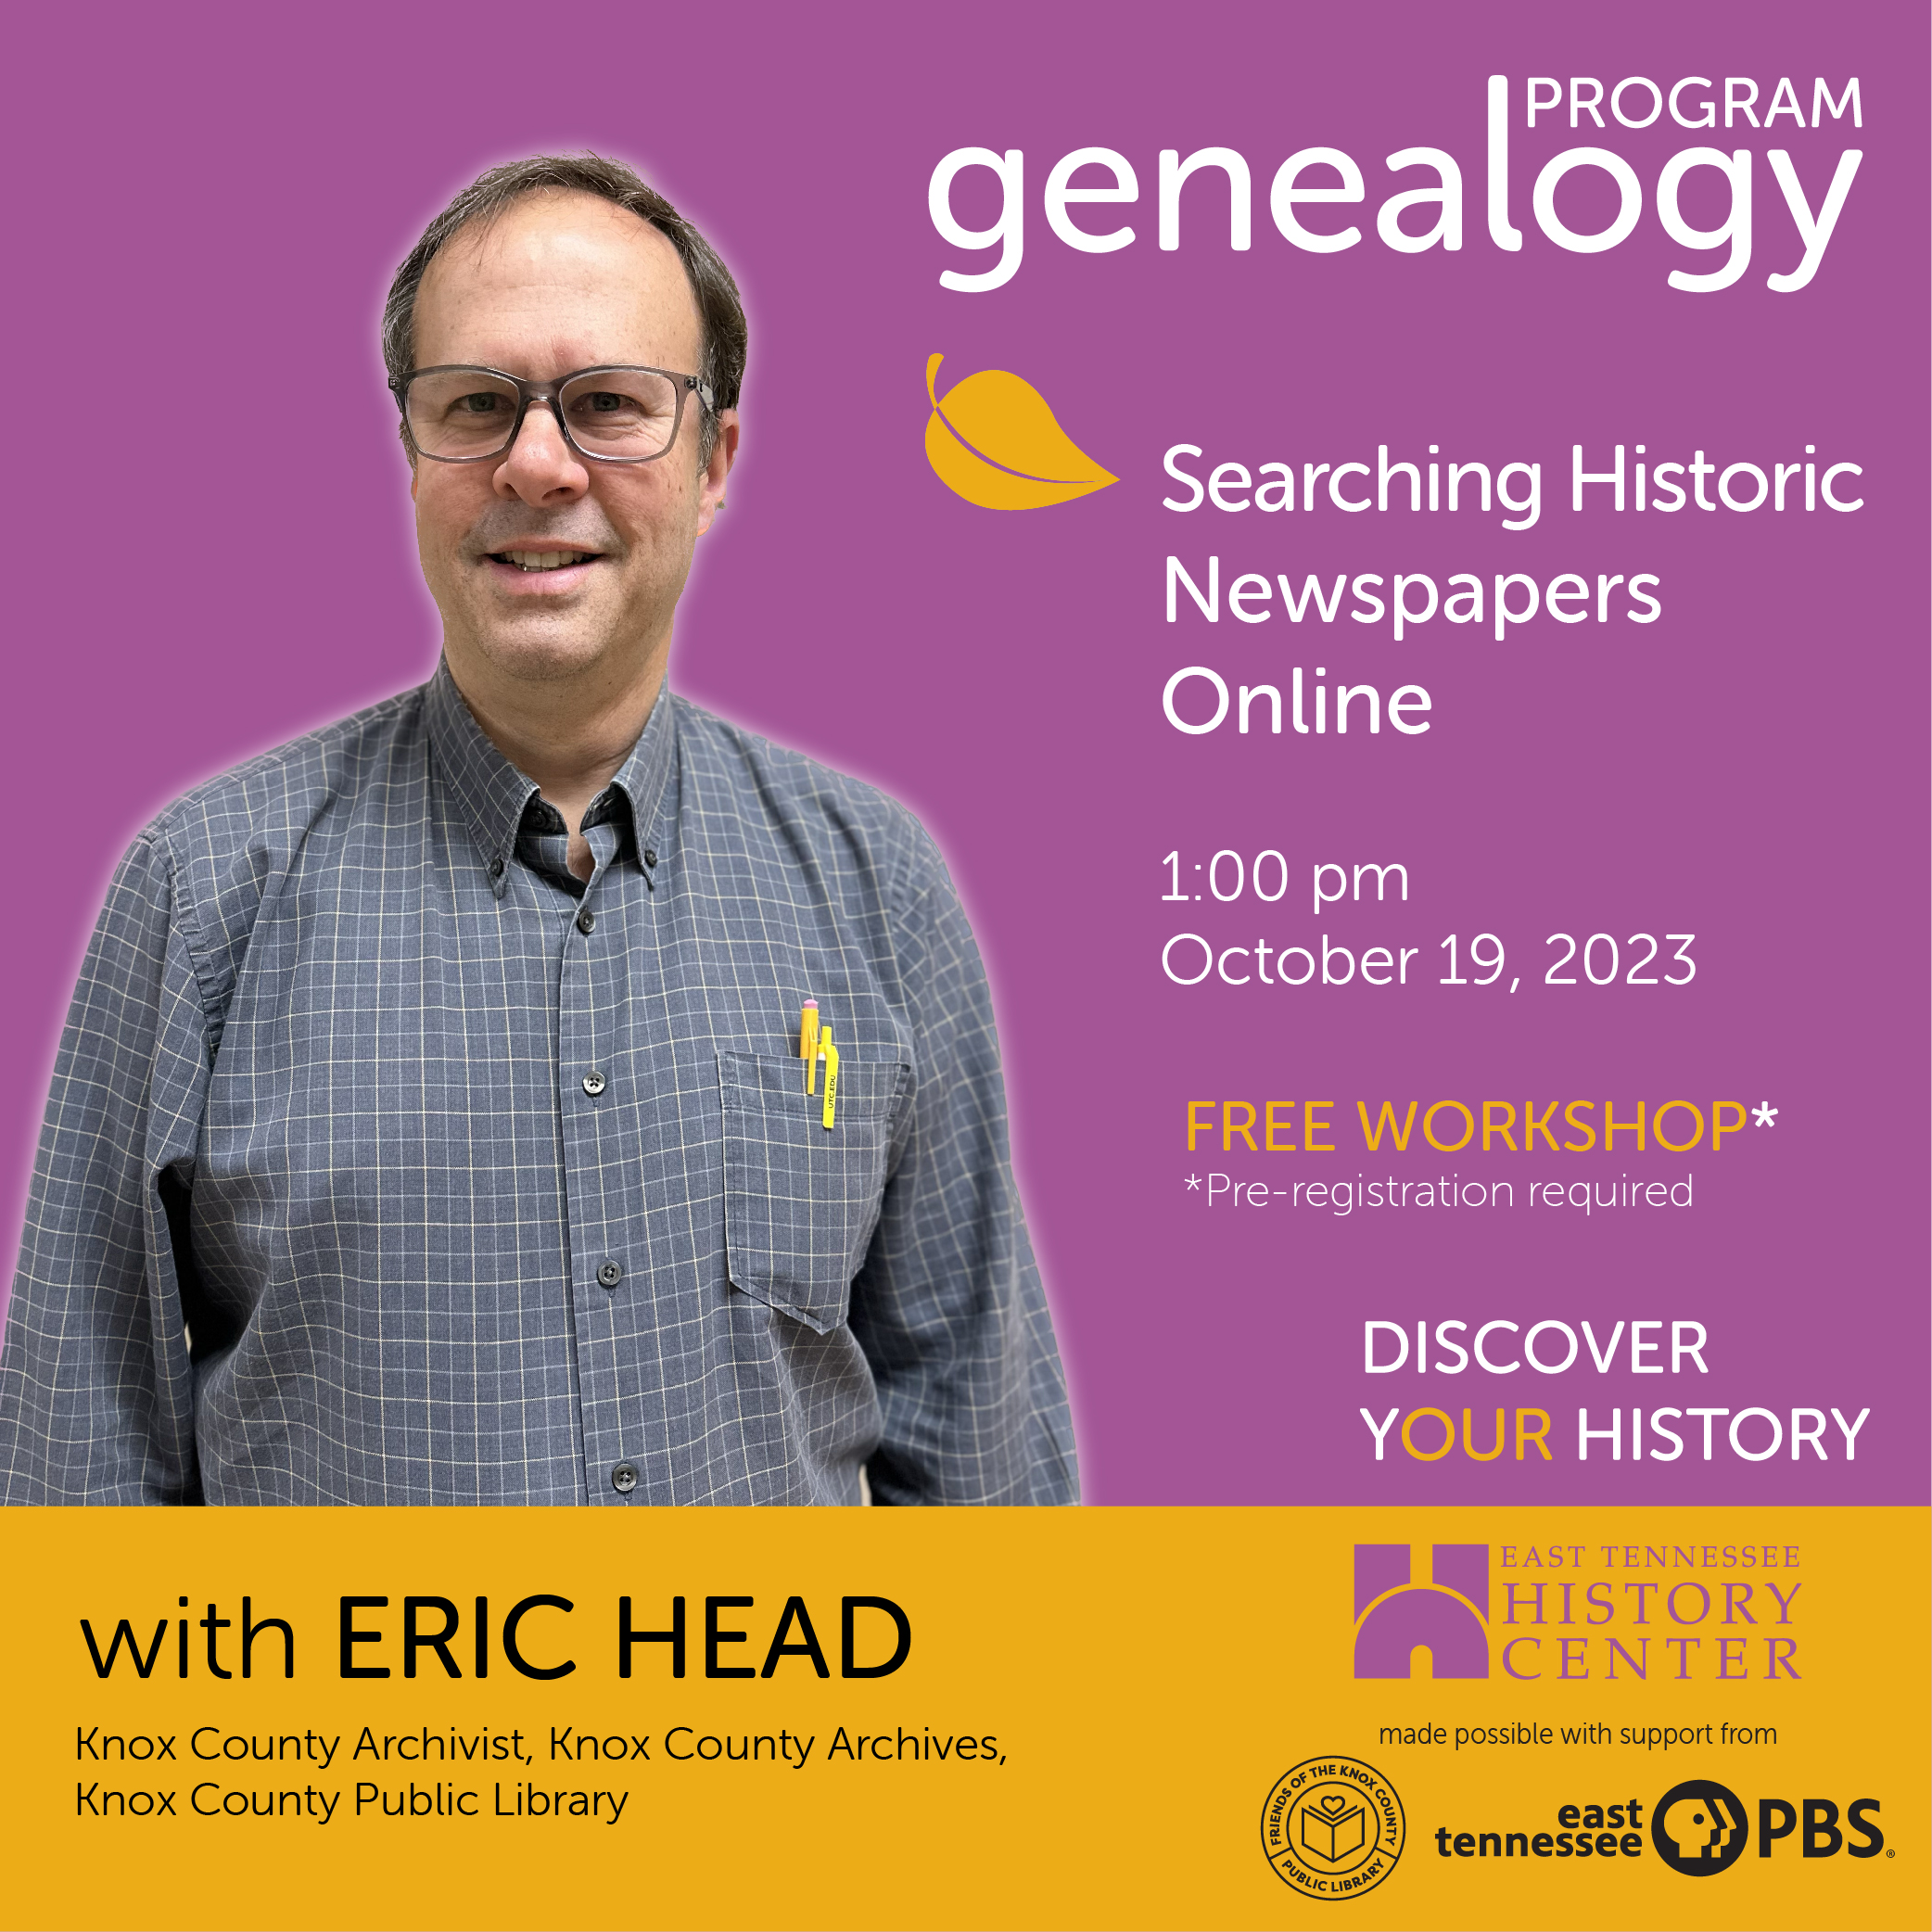 WORKSHOP: Searching Historic Newspapers Online